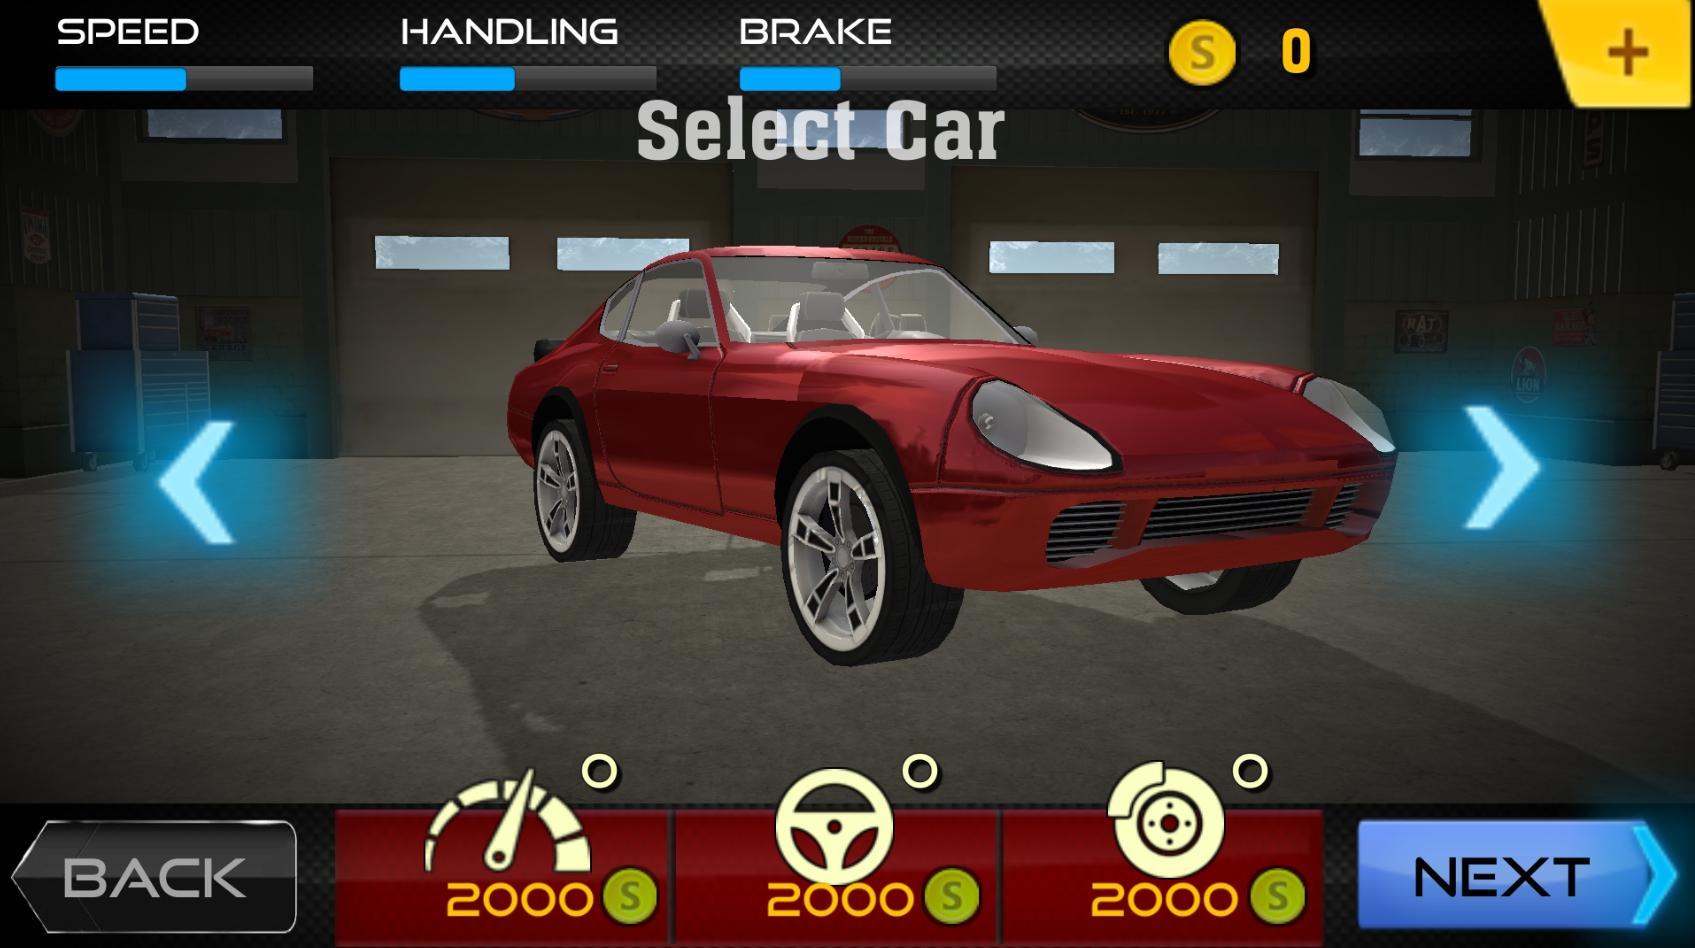 Free Race: Car Racing game for Android - APK Download